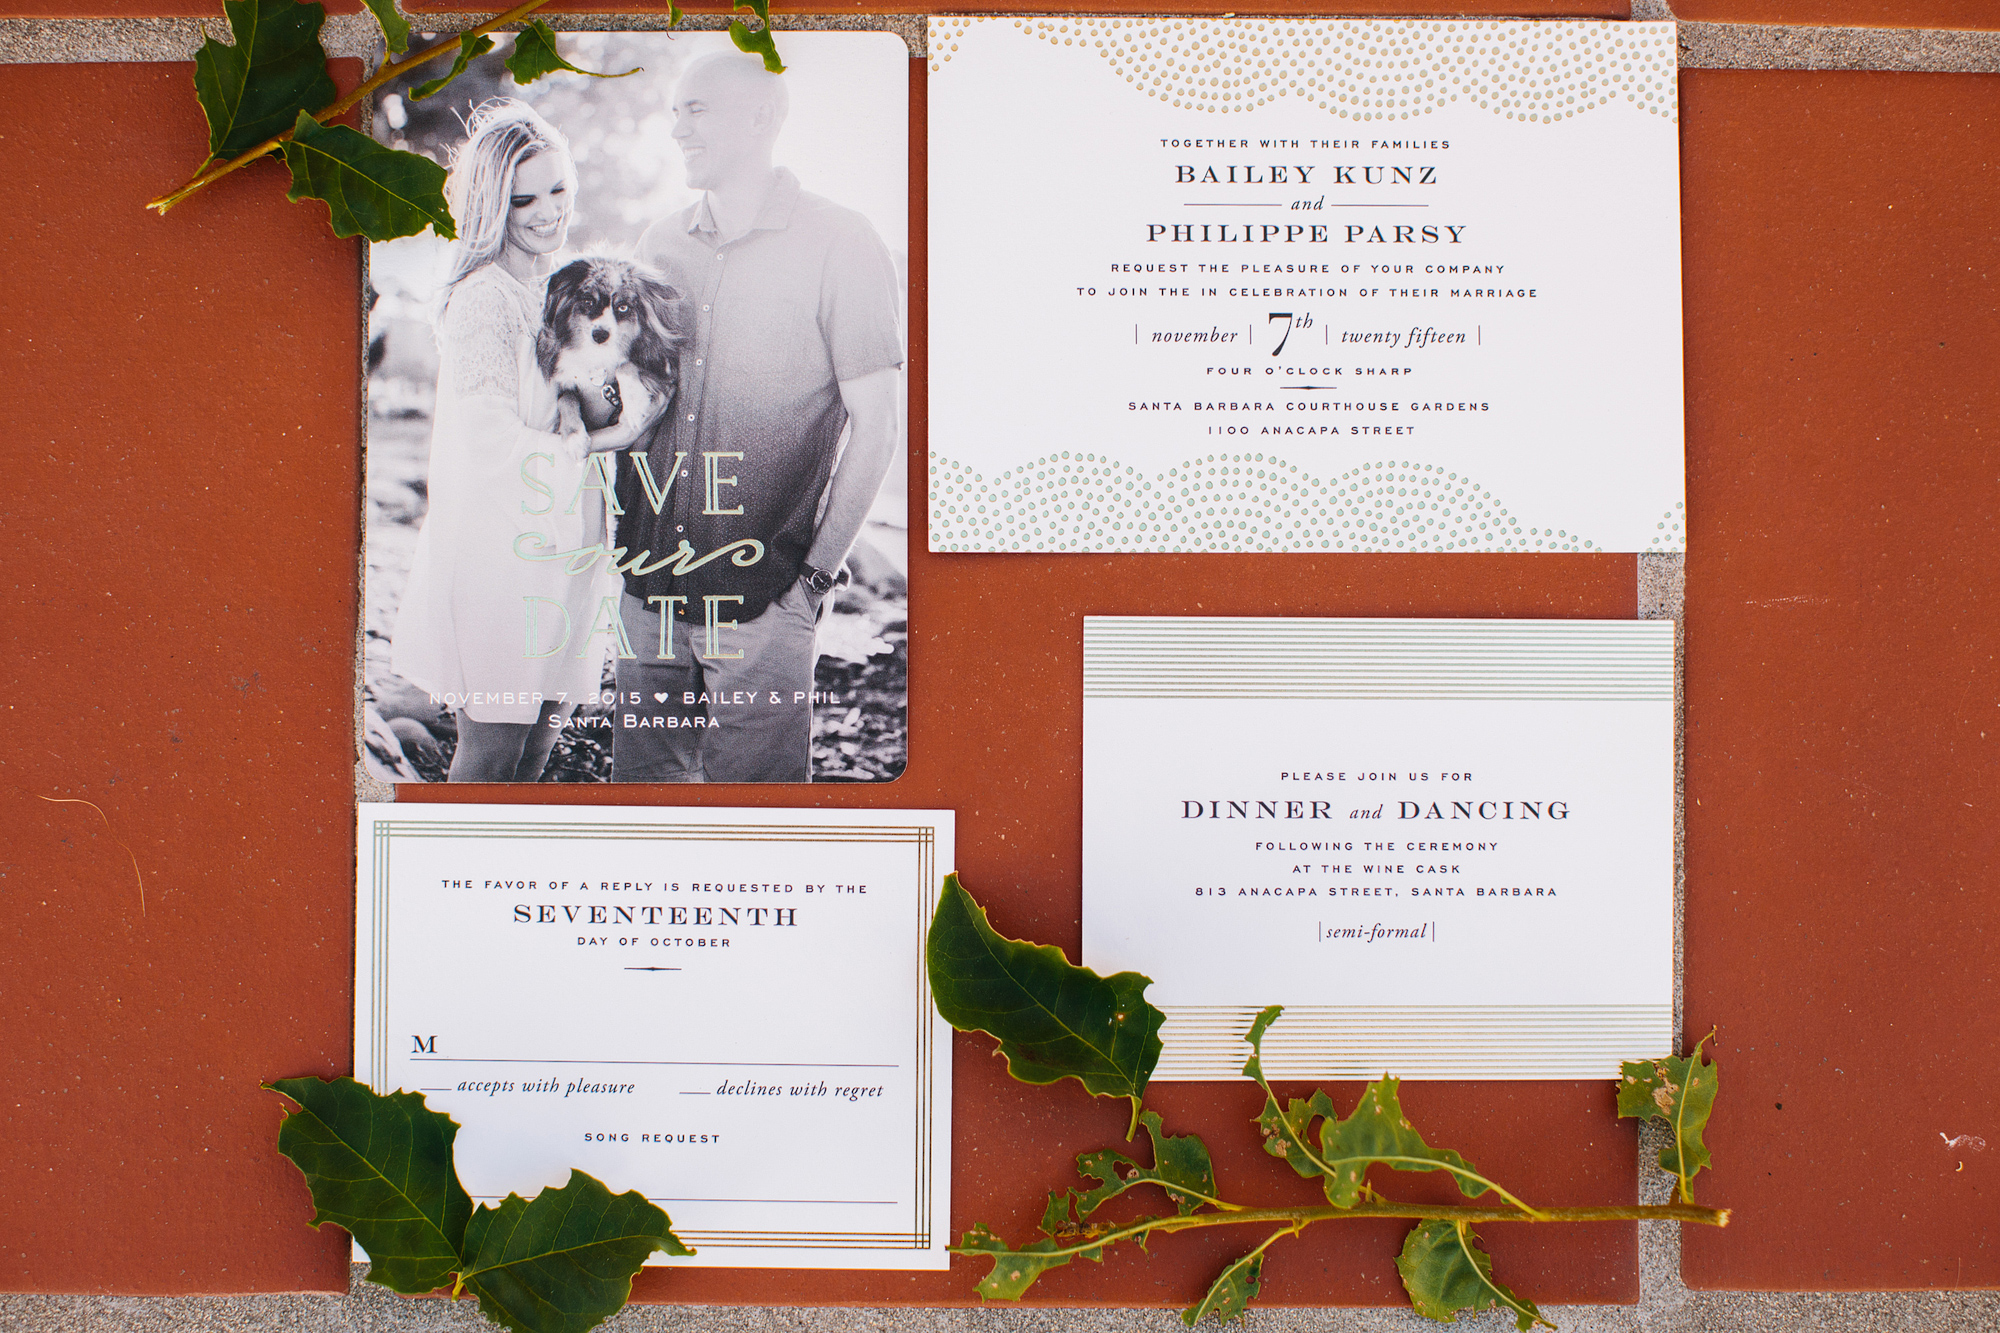 Bailey and Phil's wedding invitation suite. 